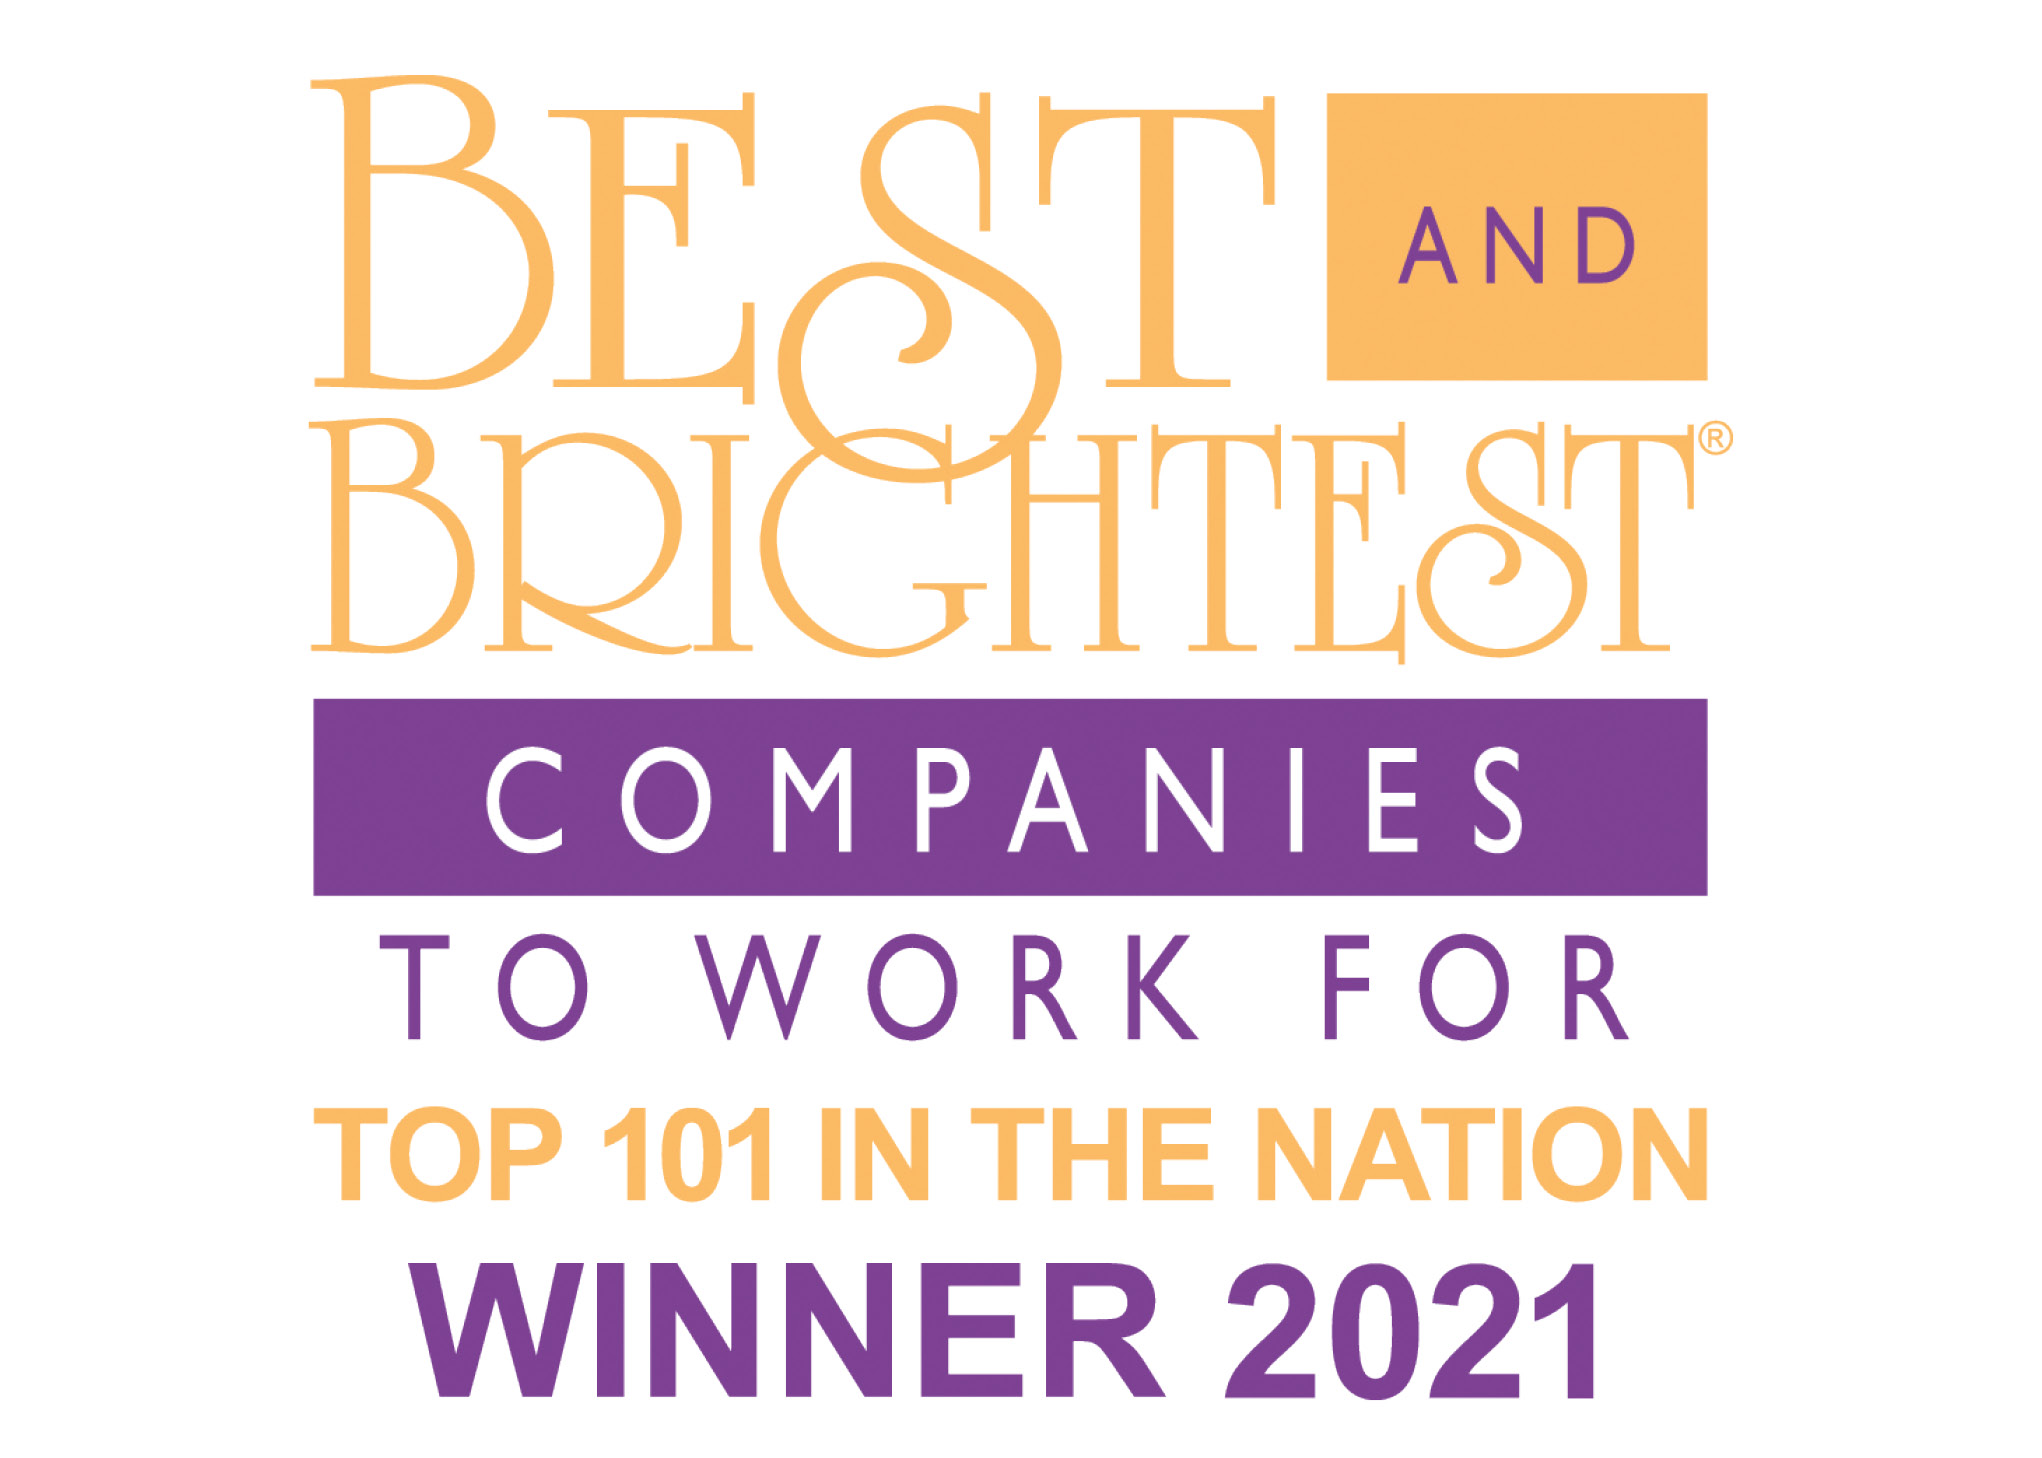 Best and Brightest Companies to Work For Top 101 in the Nation Winner